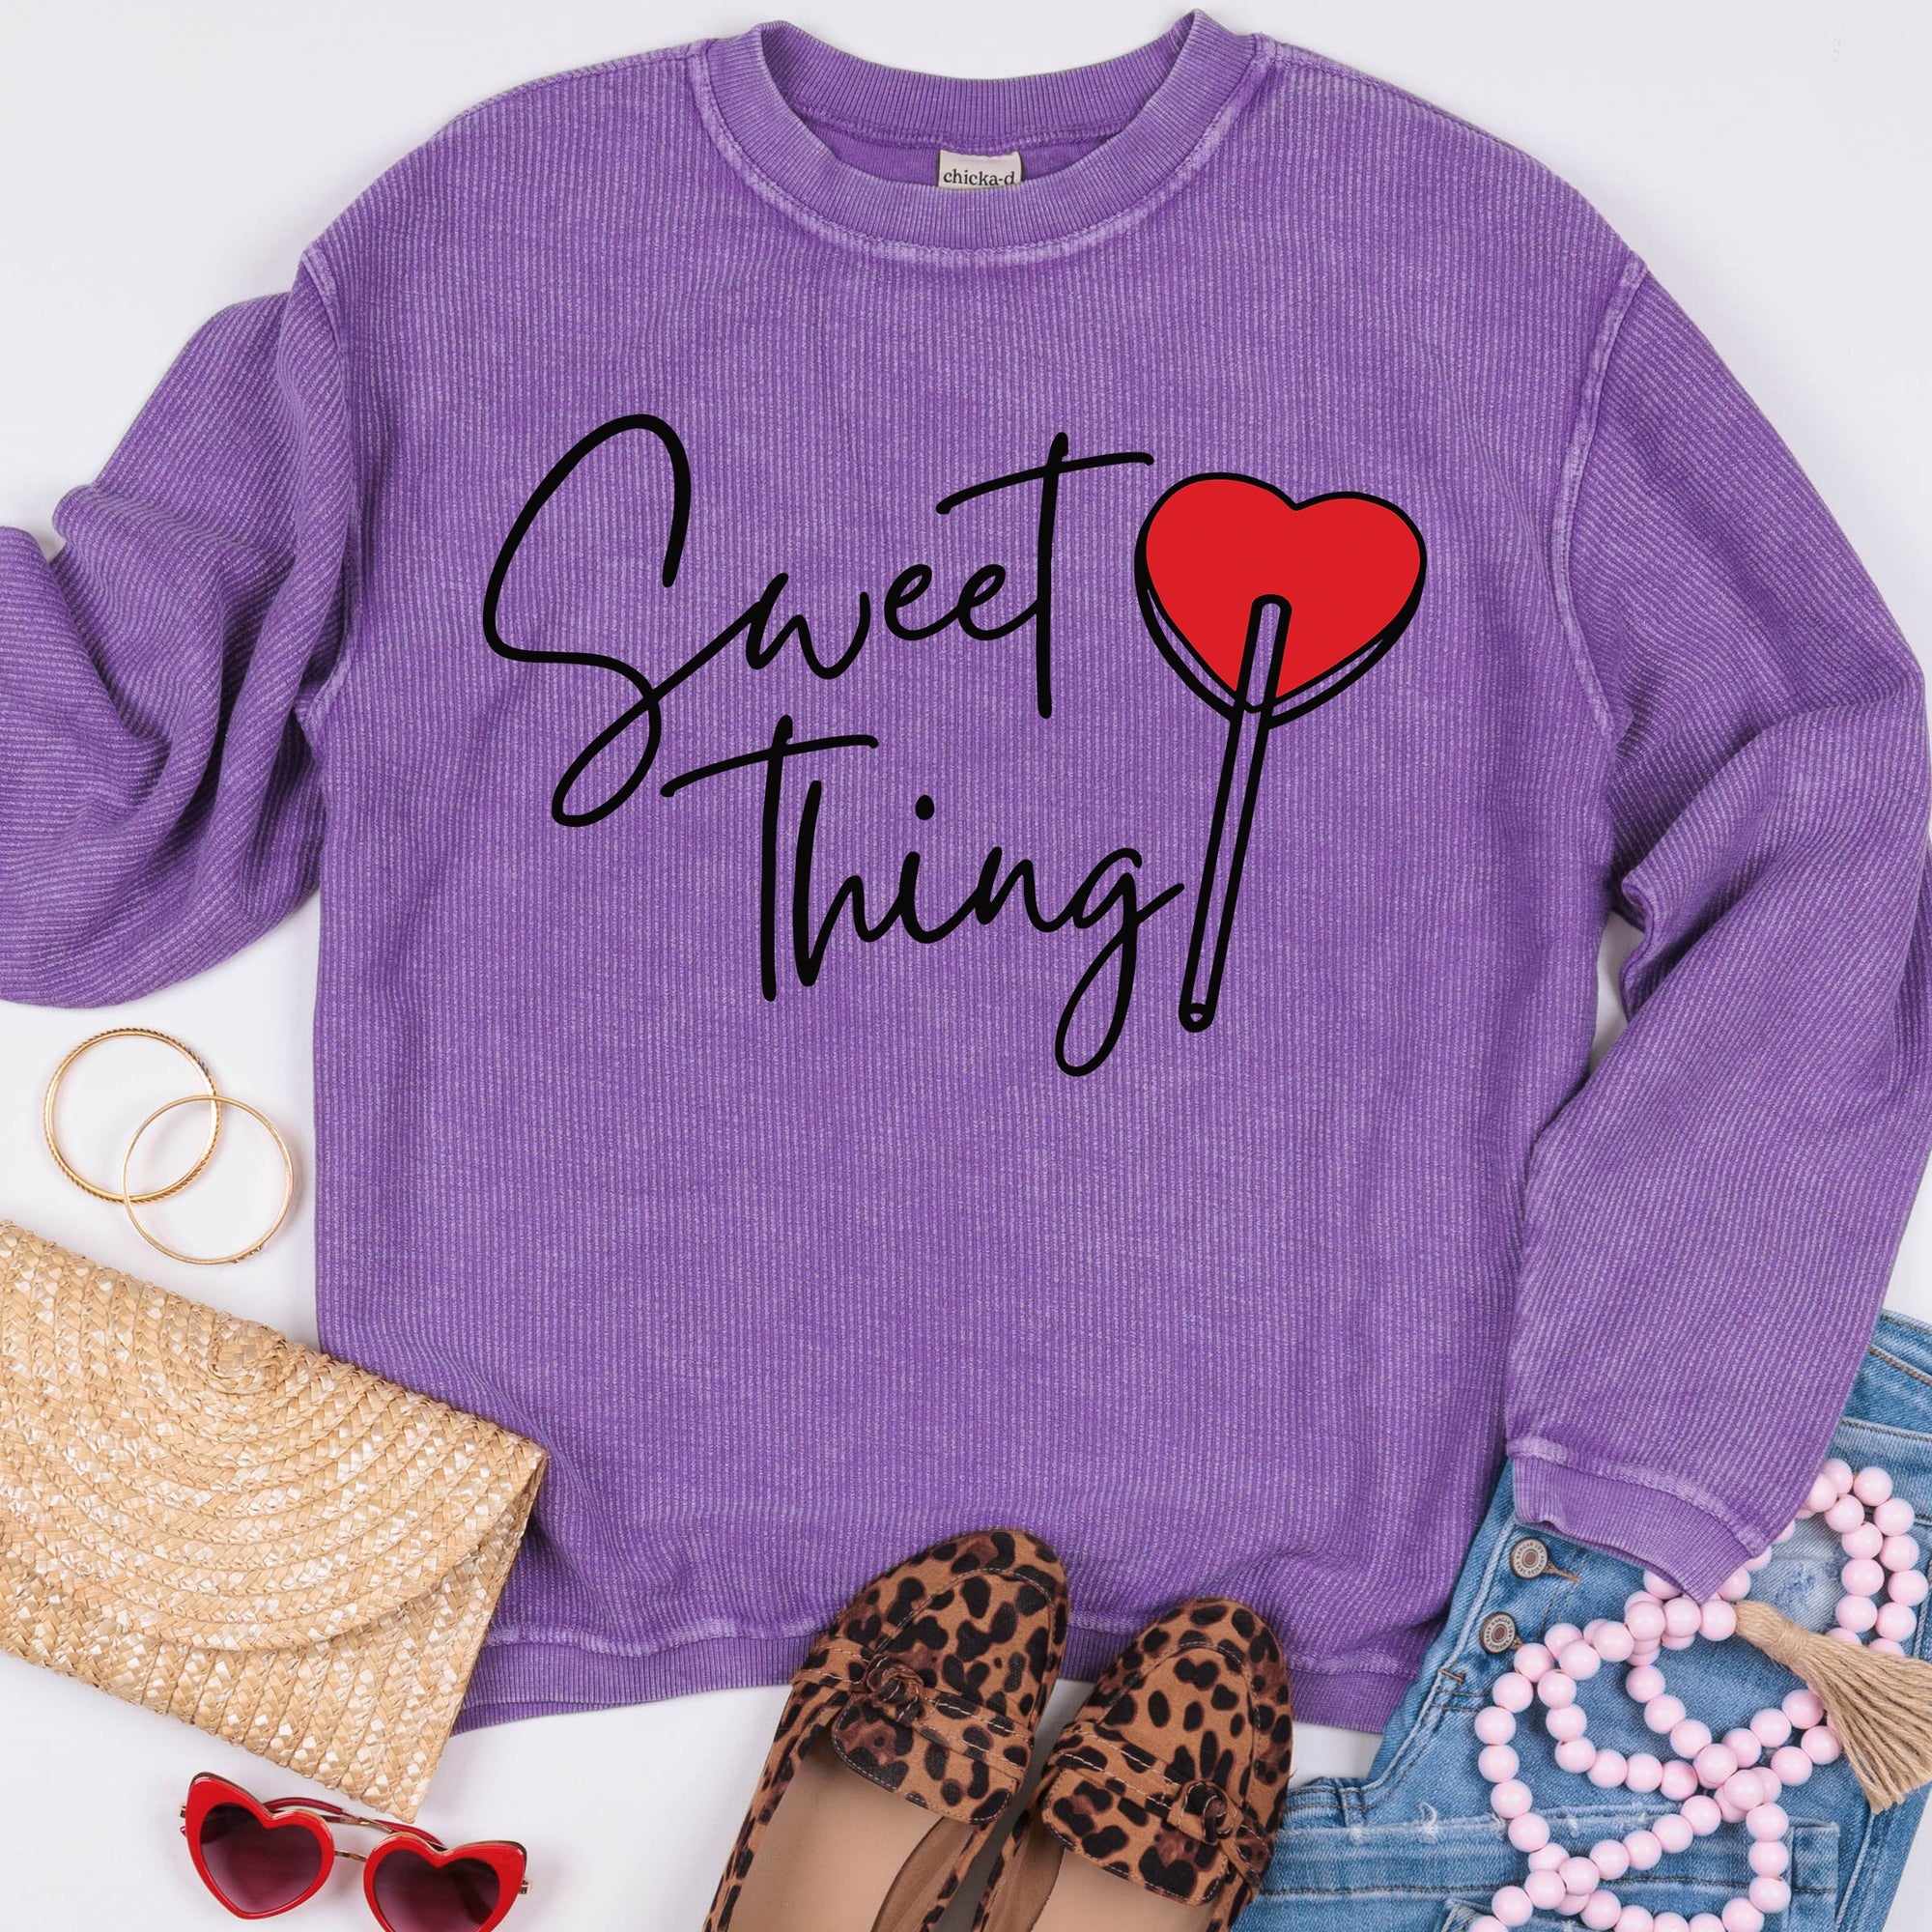 Sweet Thing Heart Wholesale Corded Crew - Limeberry Designs